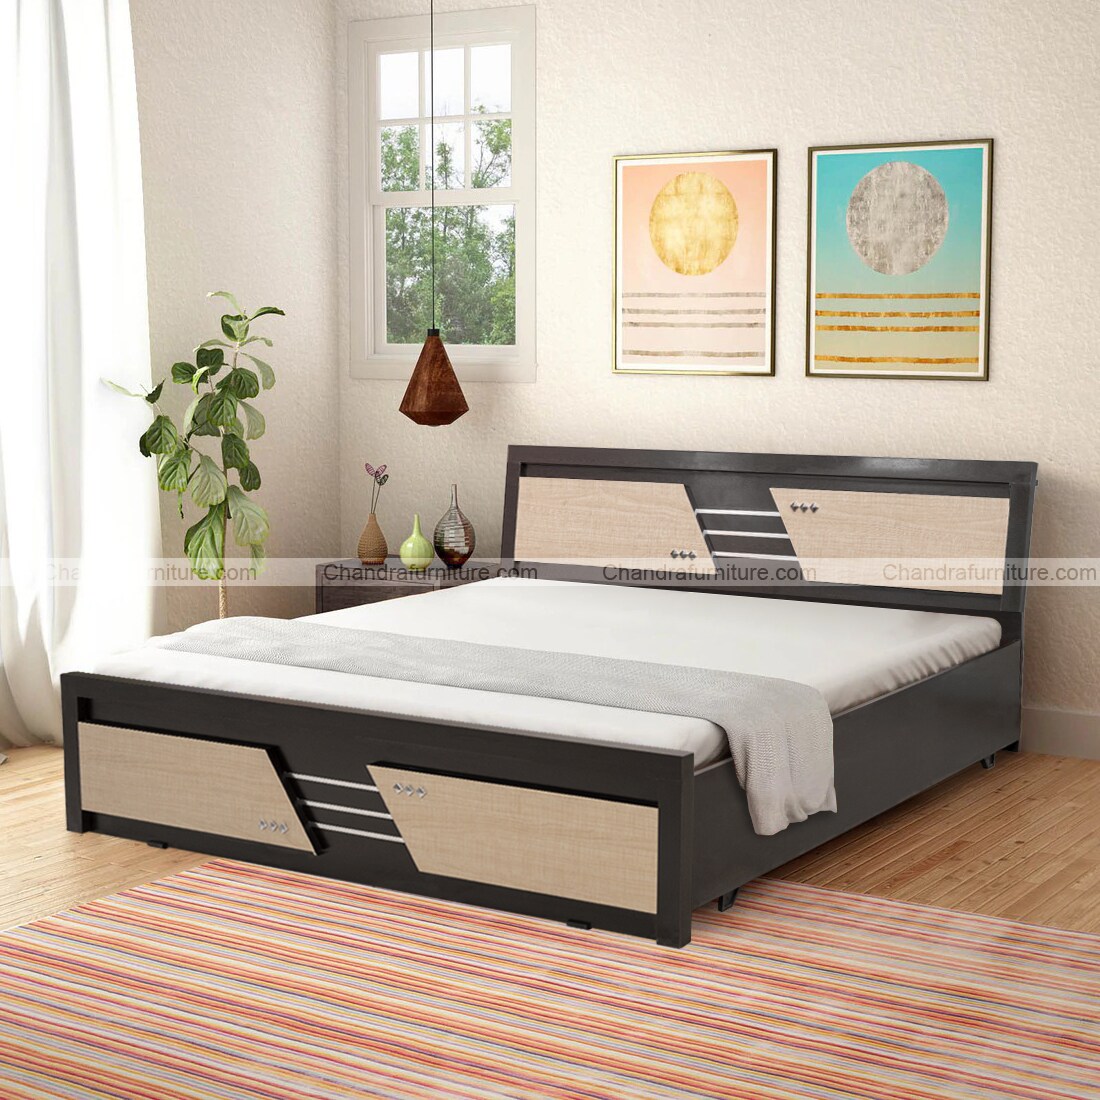  CHANDRA FURNITURE  KING SIZE BED CLS 08  With Hydraulic 